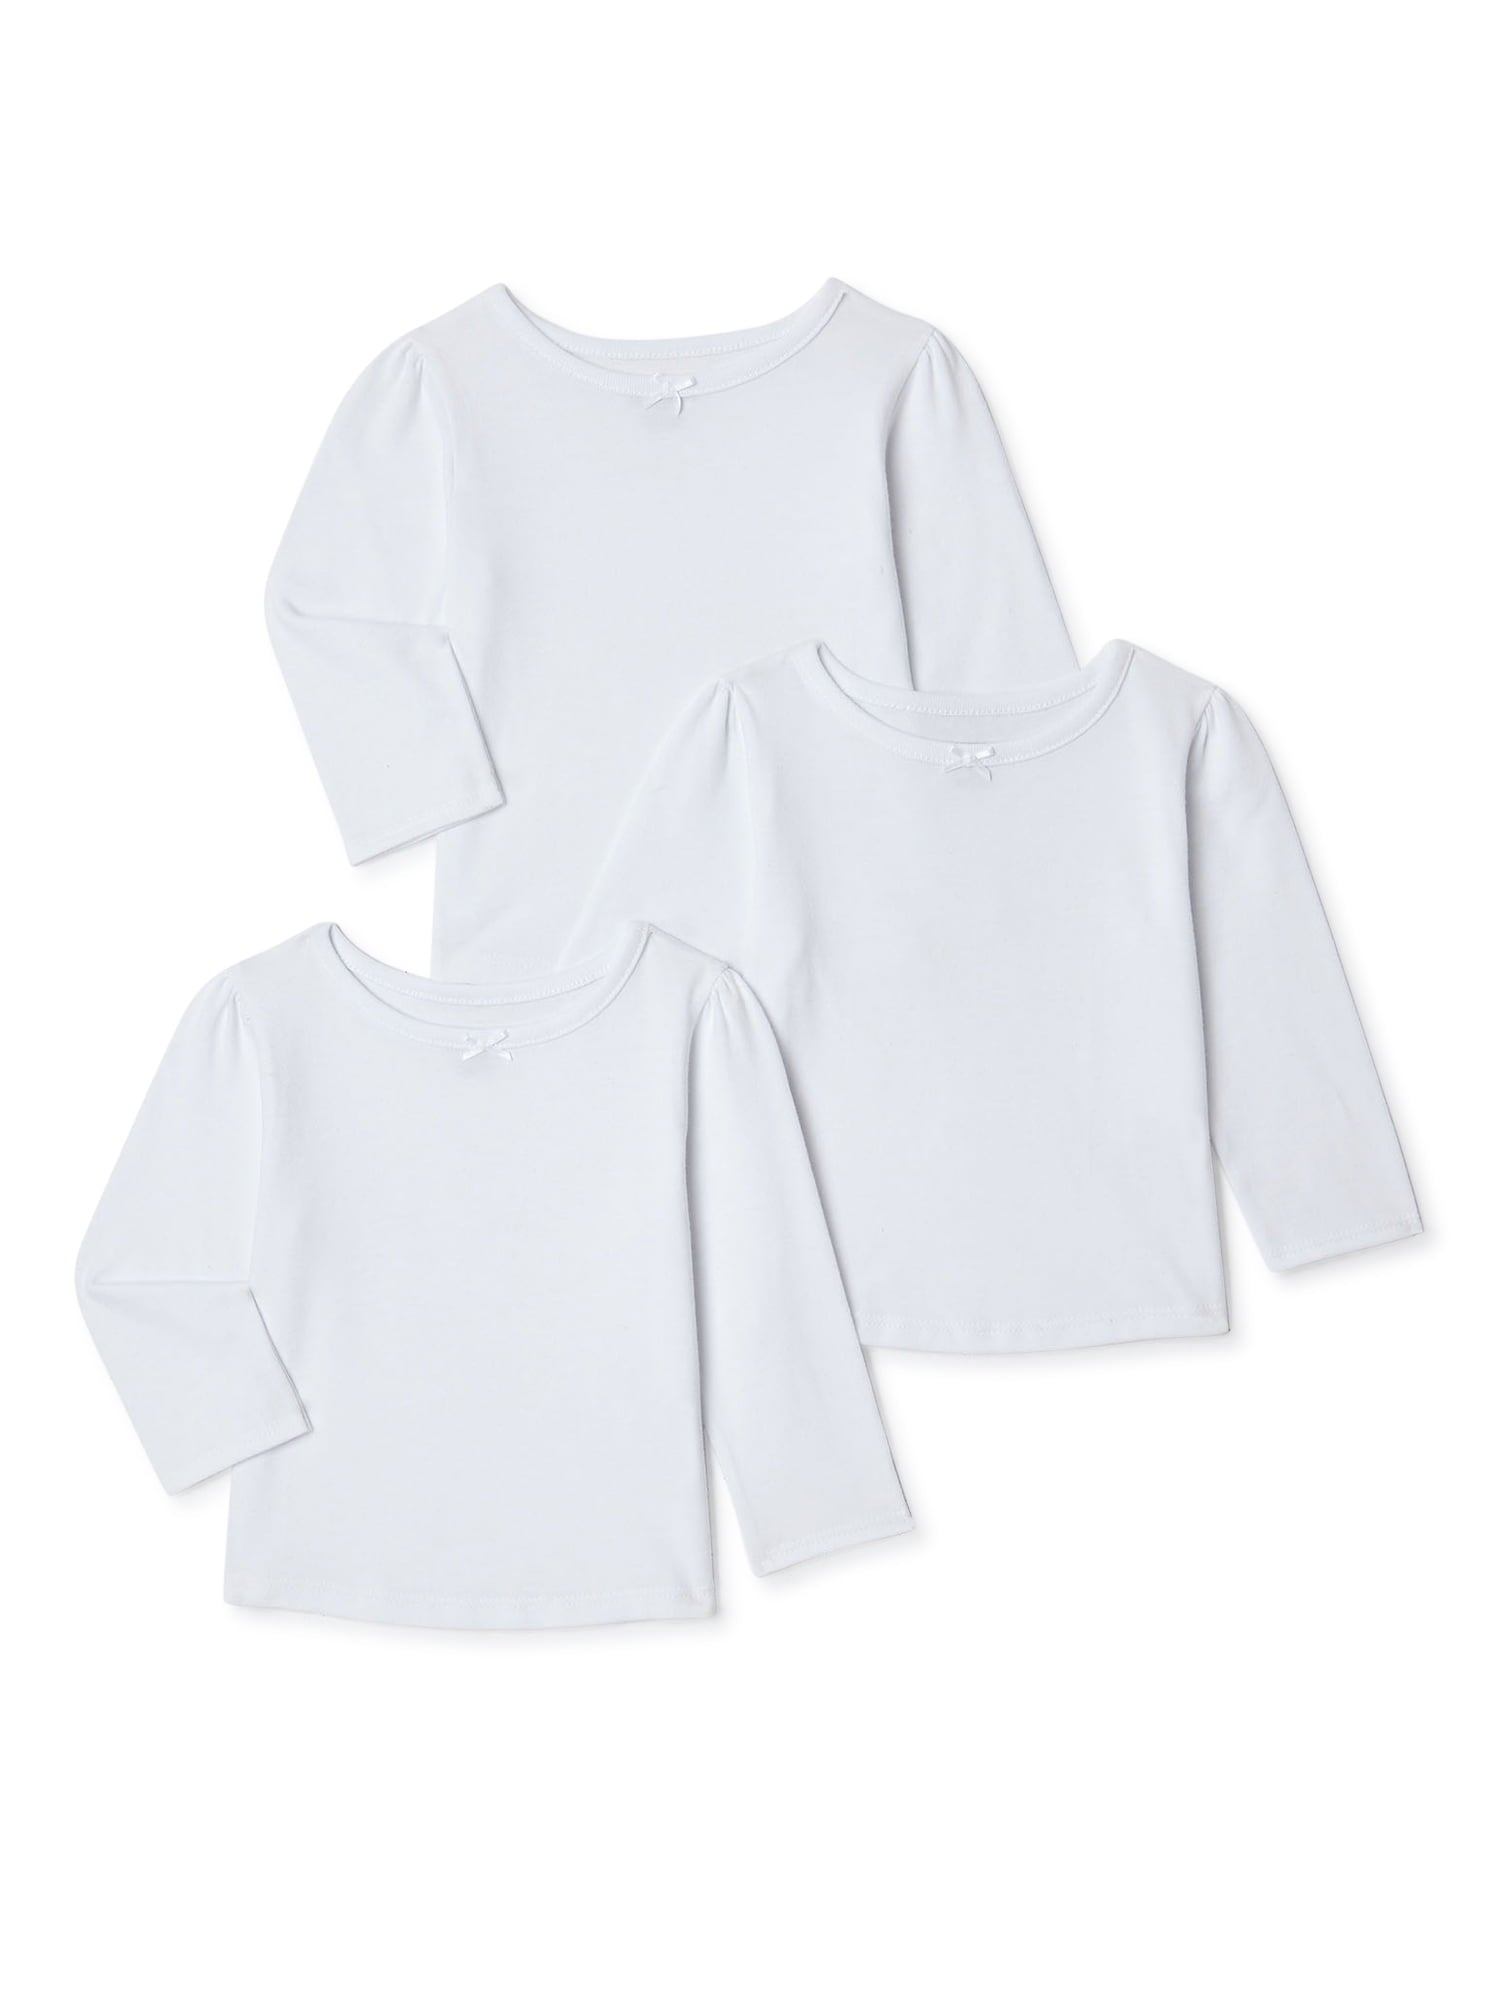 Garanimals Baby and Toddler Girl Long Sleeve Tops, 3-Pack, Sizes 12M-5T